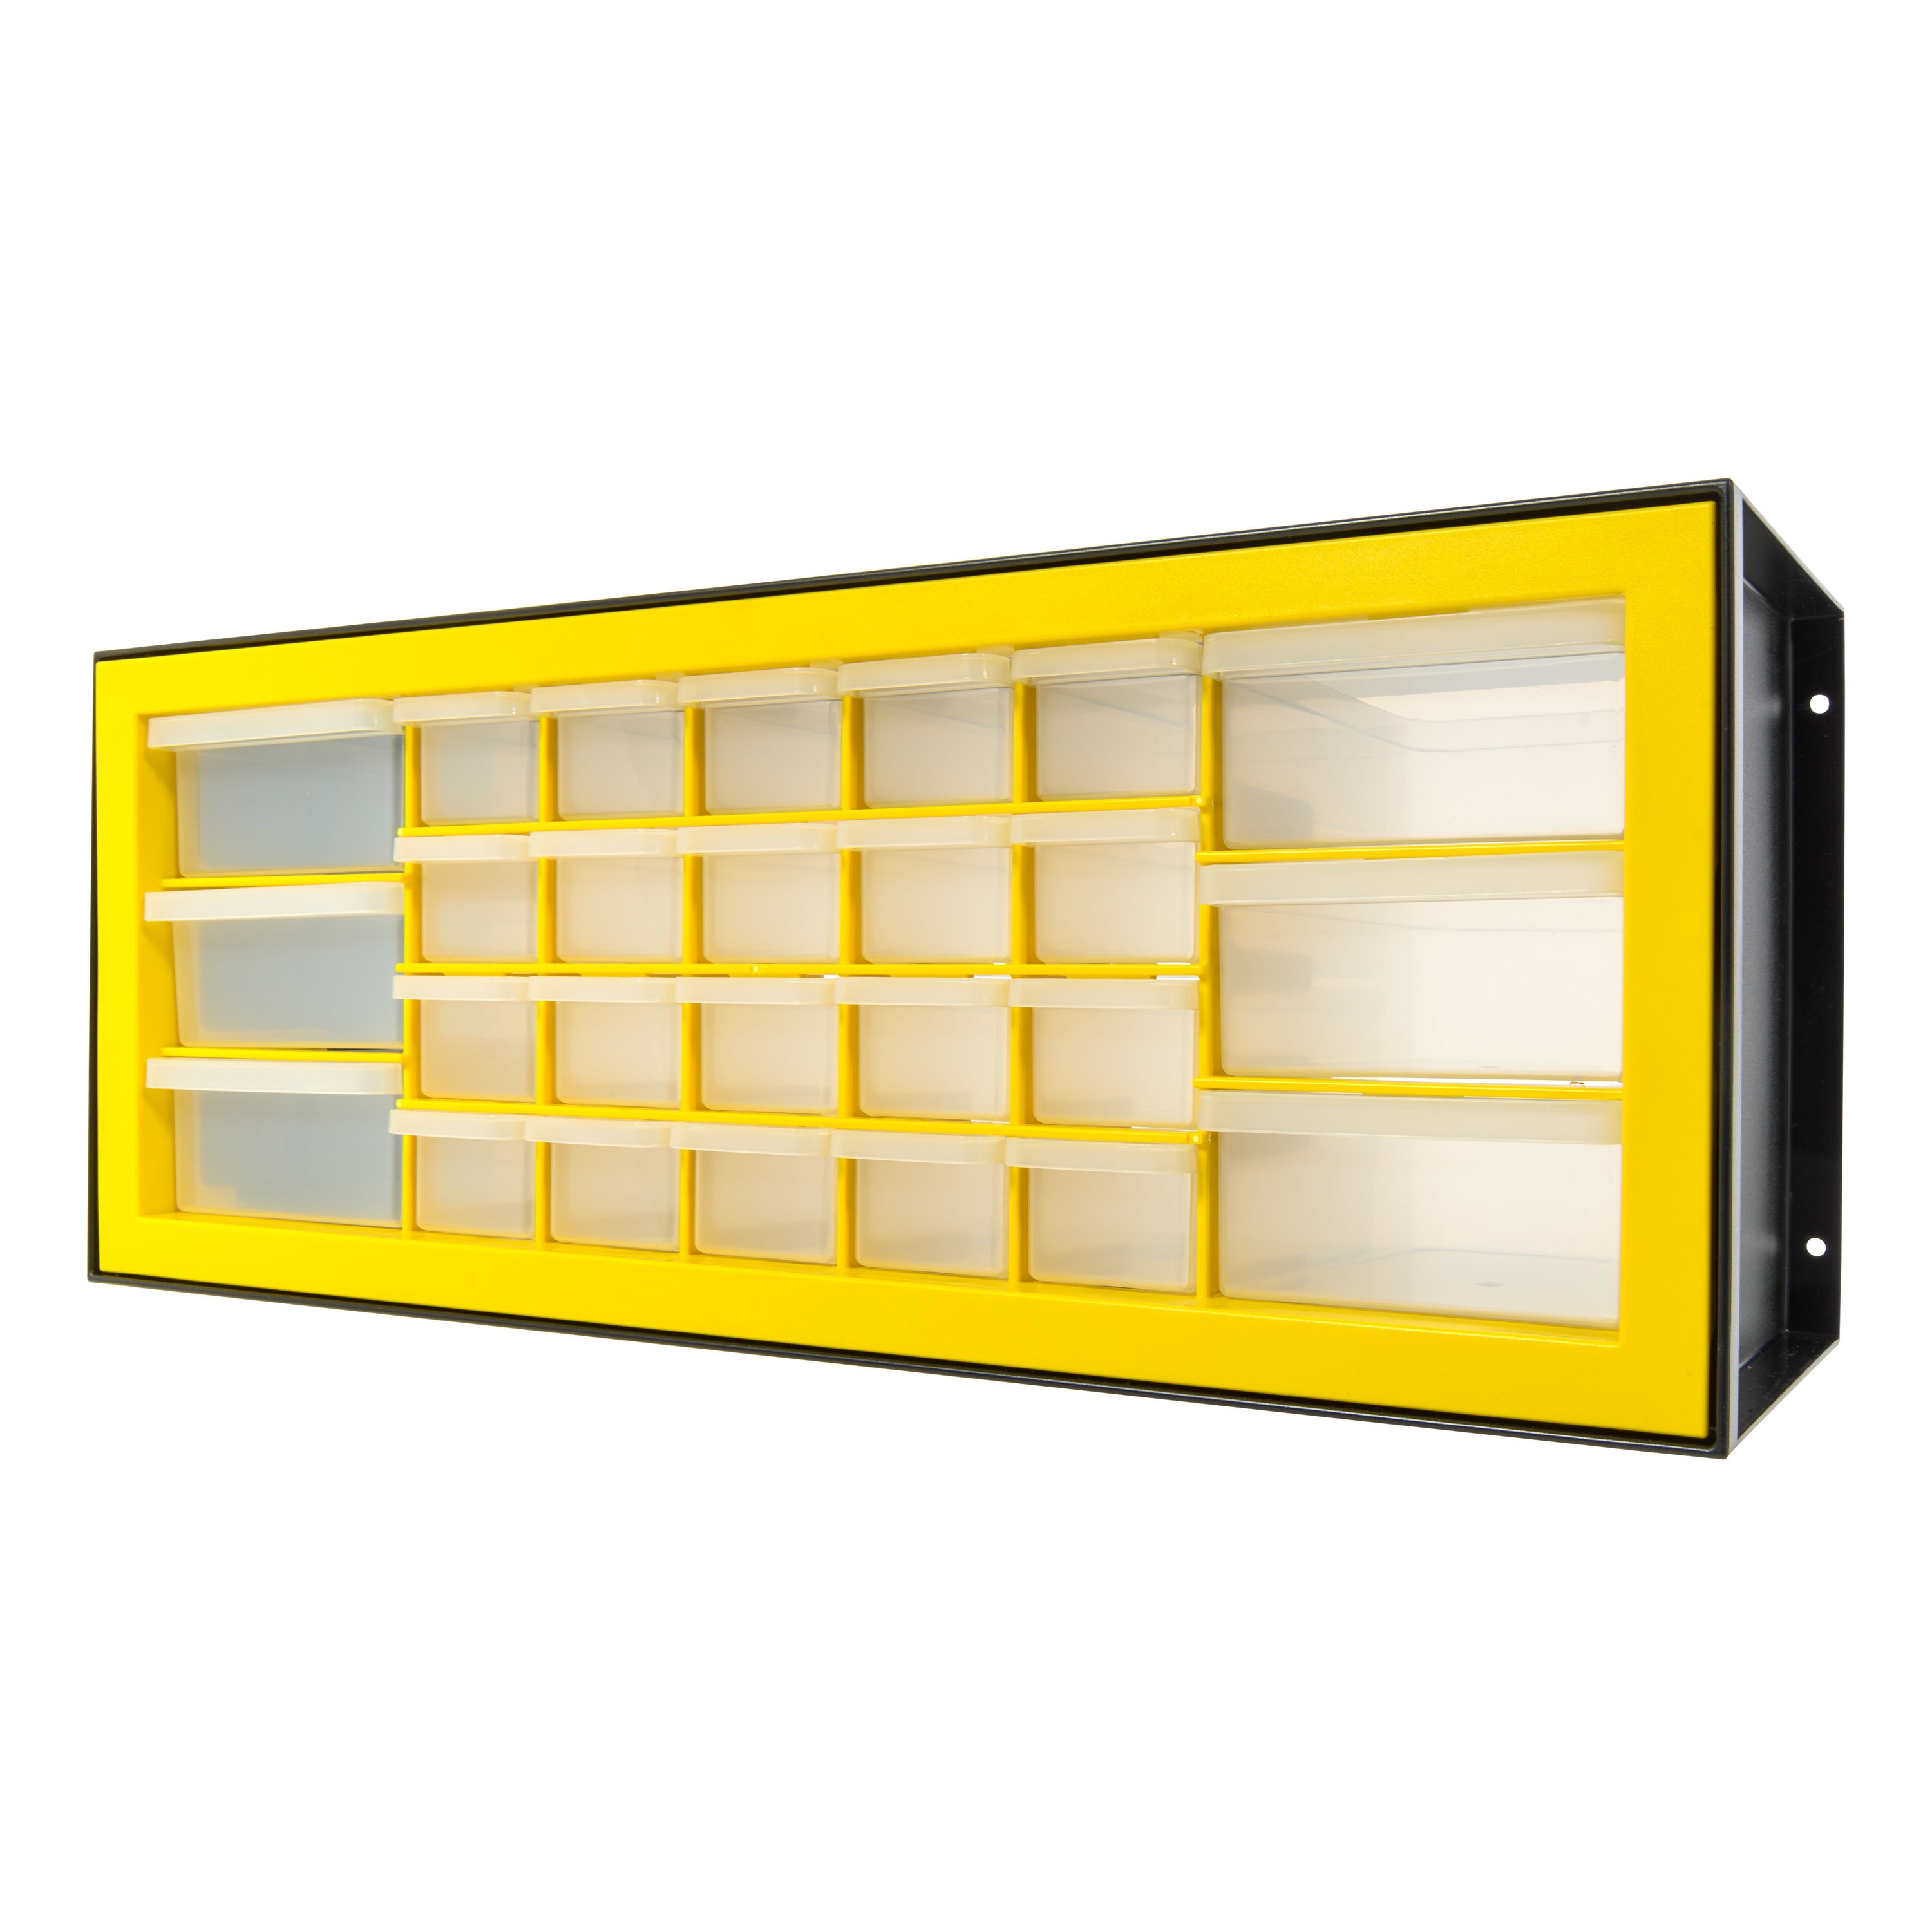 Pioneer Small Parts Storage Organizer with 11 Translucent Drawers and Built-In Handle or Wall Mounting for Organizing and Storing Hardware, Hobby and Crafts